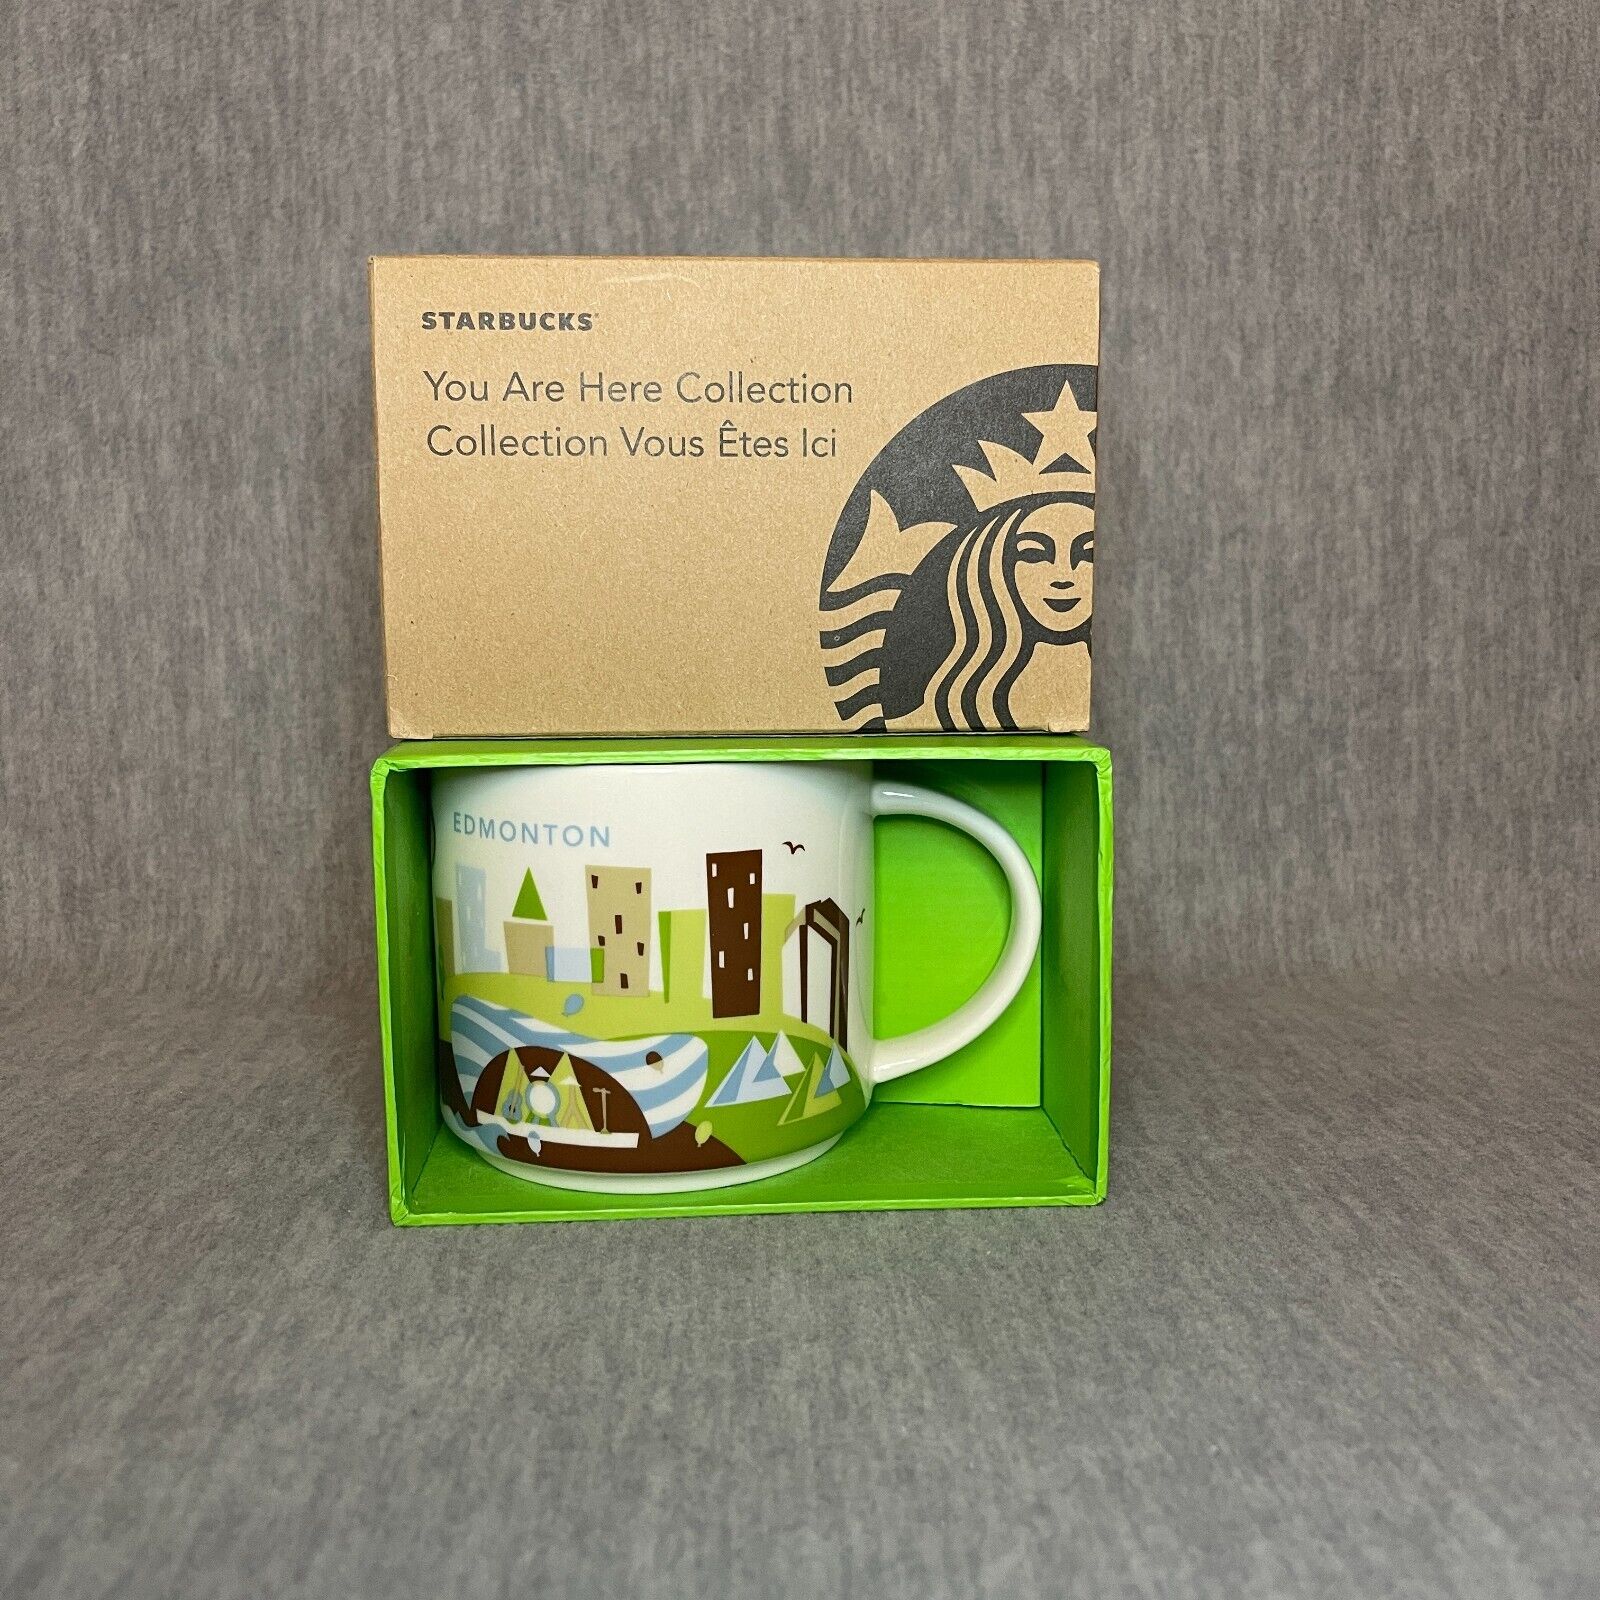 Starbucks You Are Here Collection EDMONTON Canada Mug 2013 with Box